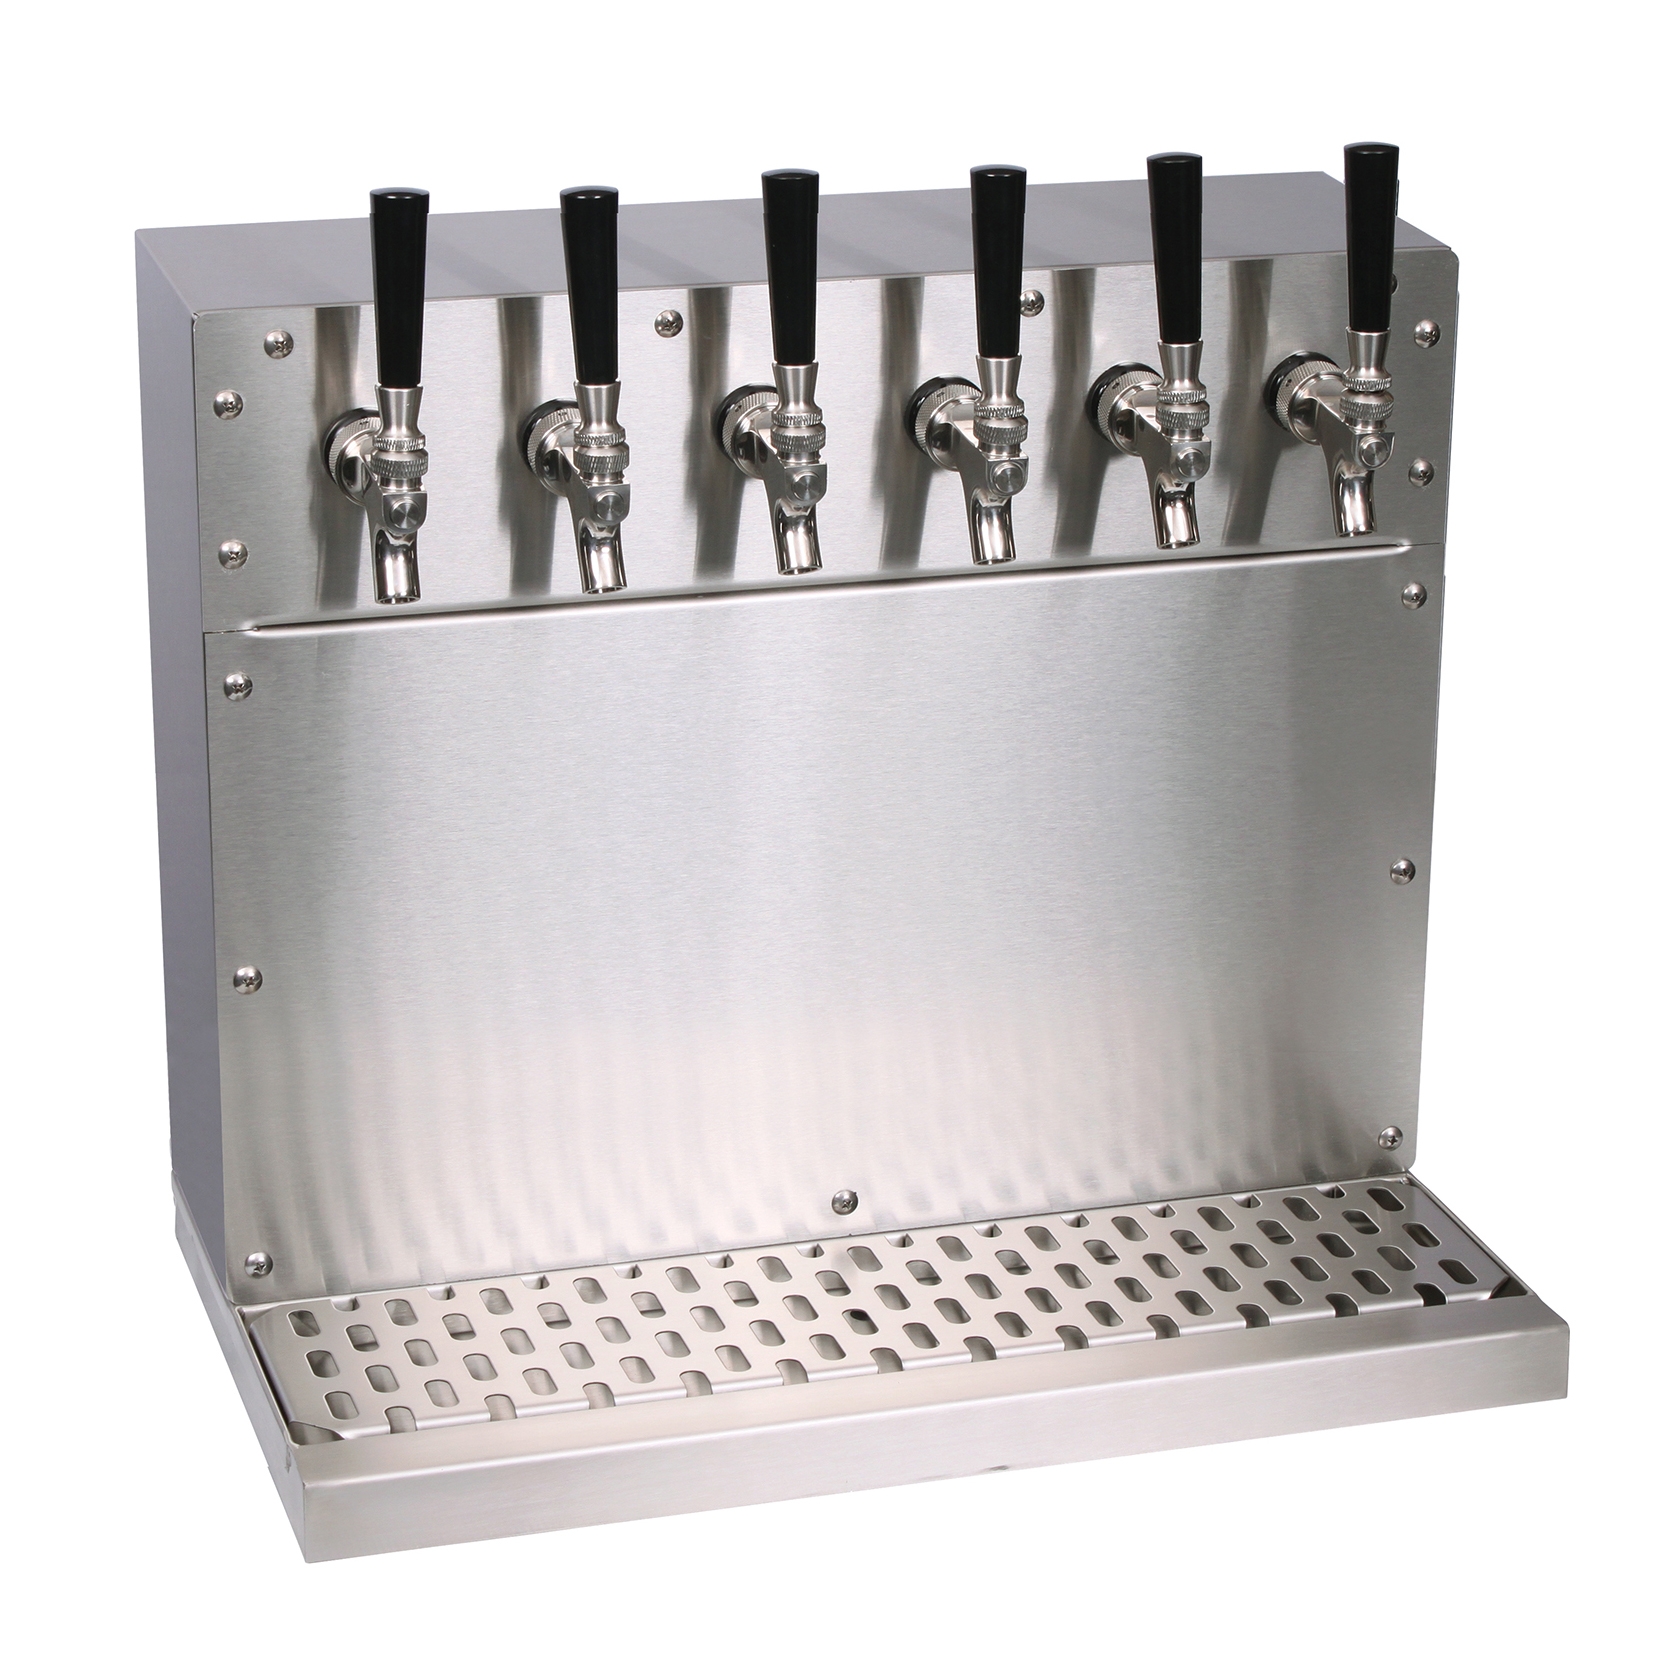 Glastender WT-12-SSR Draft Beer / Wine Dispensing Tower w/ 12 Faucets, Wall Mounting Brackets